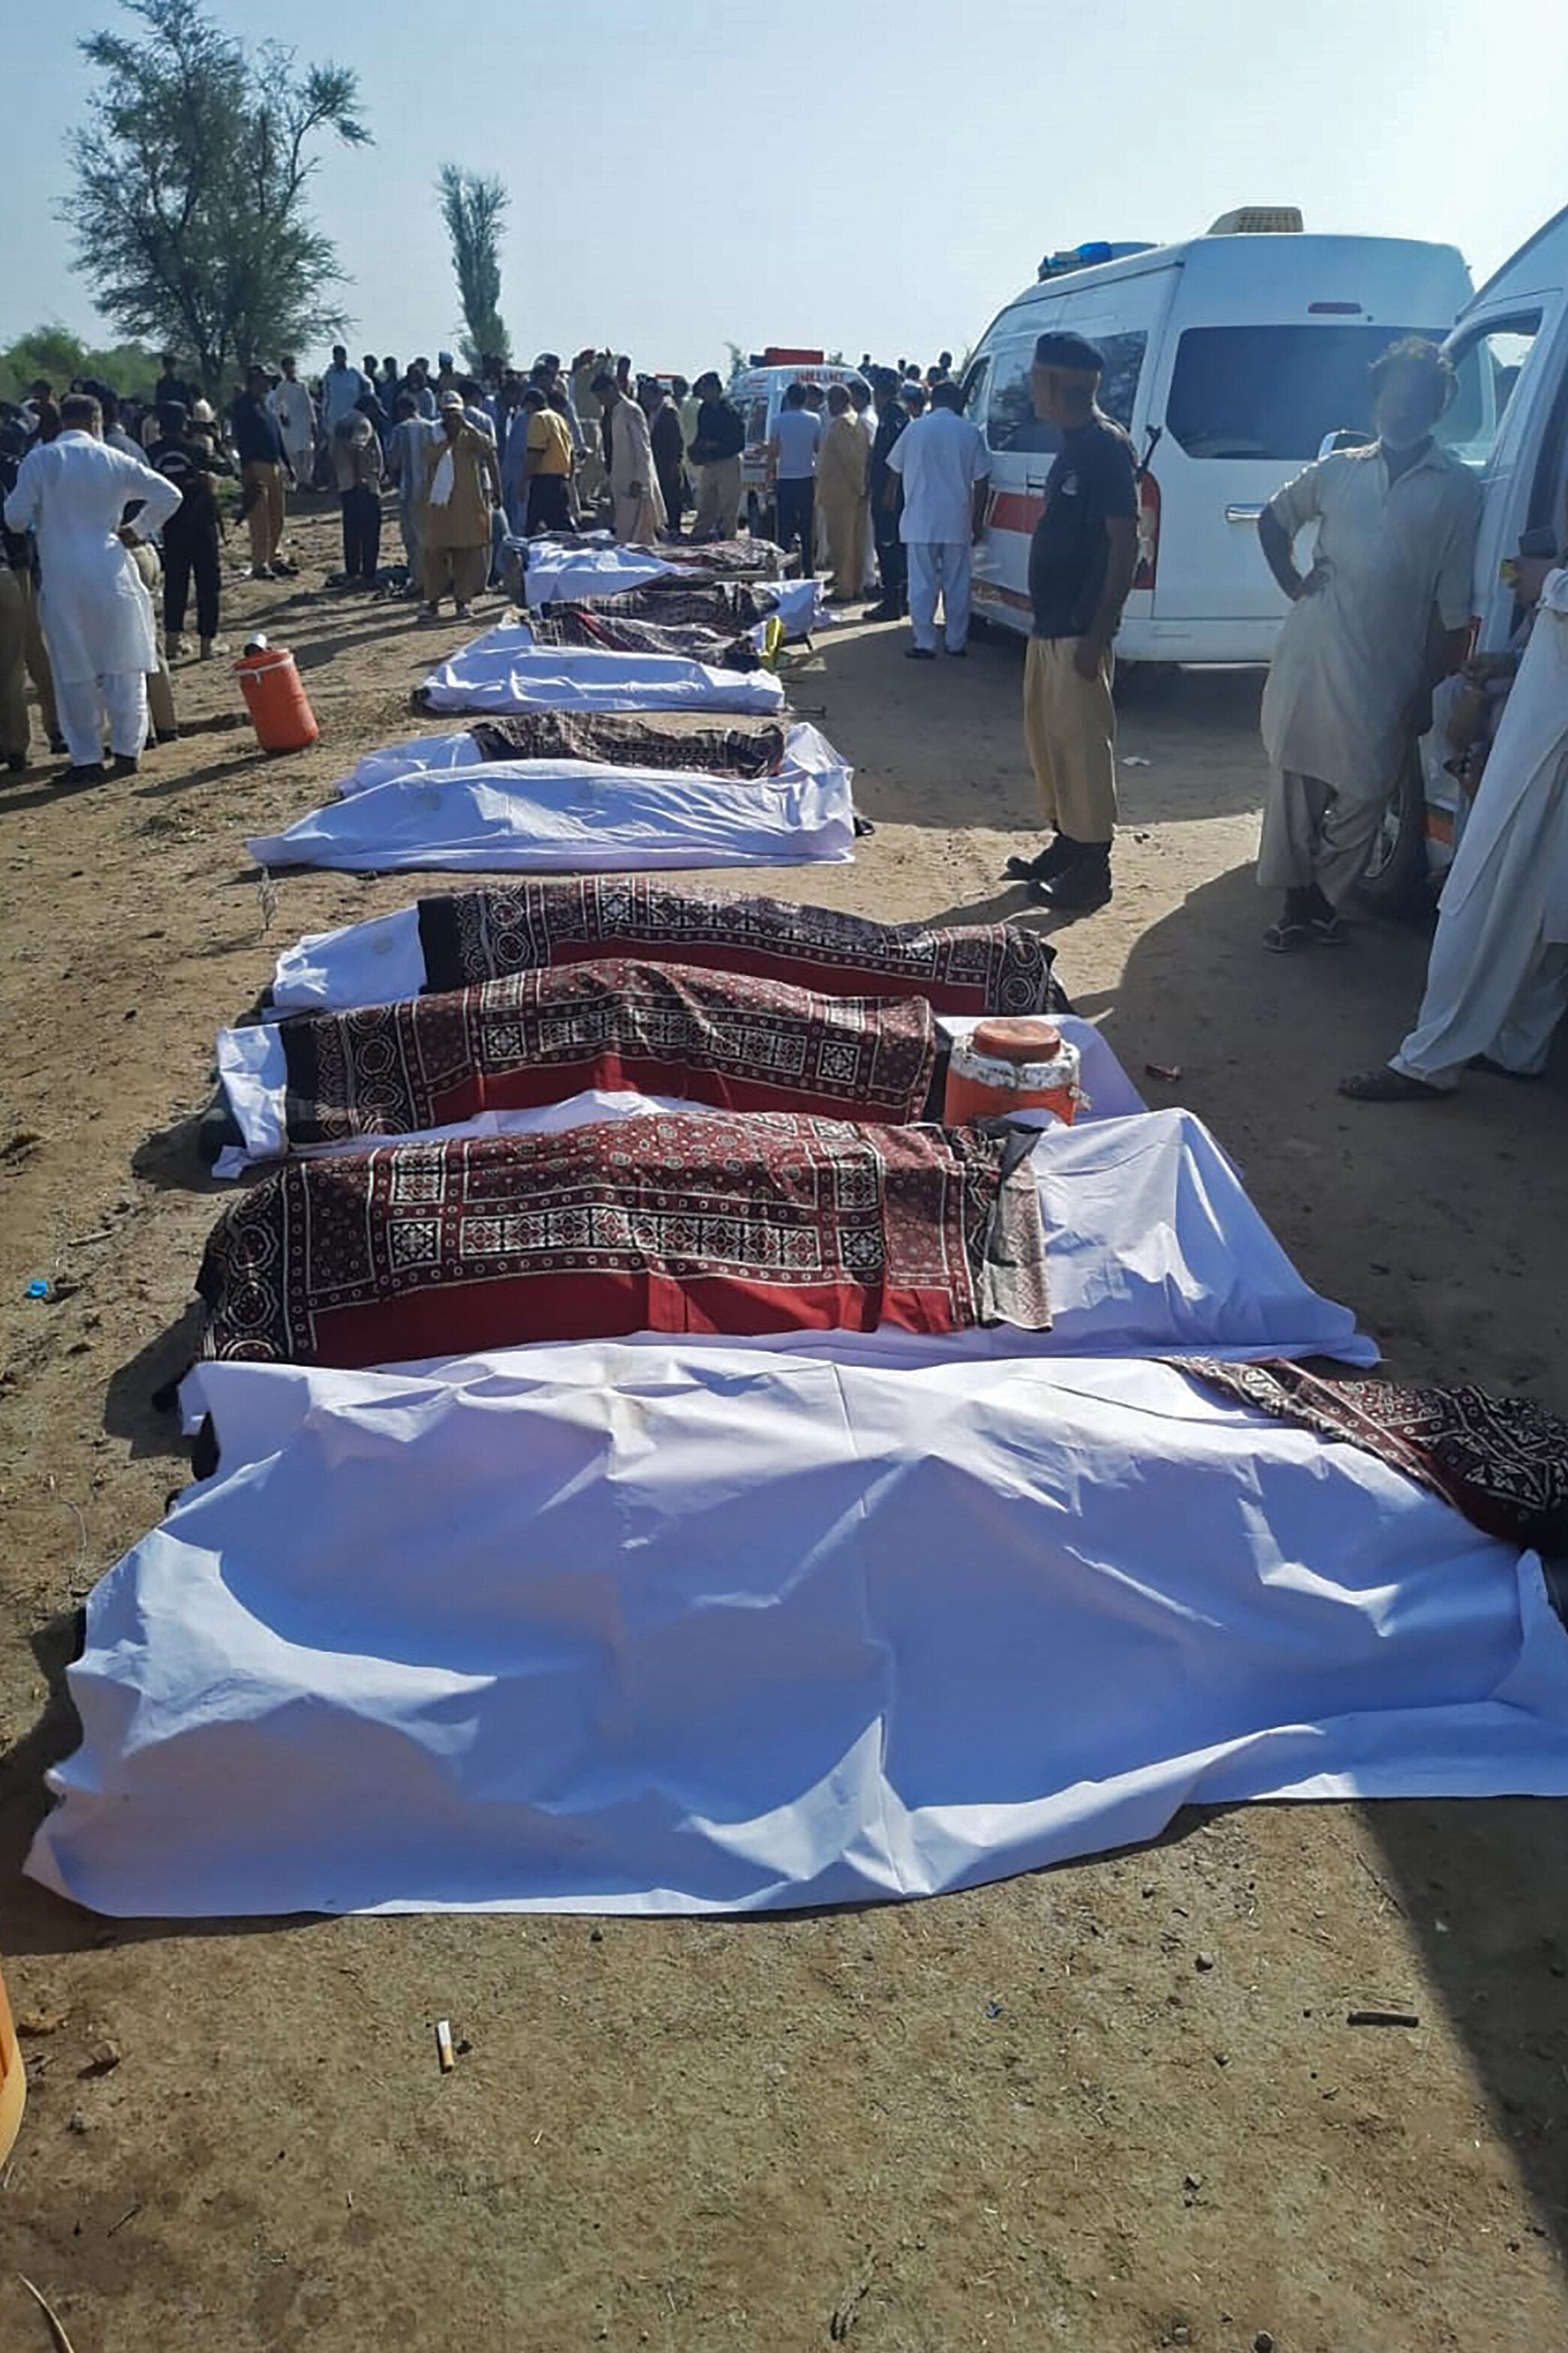 Several dozen people died in a train accident in Daharki area of the northern Sindh province on June 7, 2021.